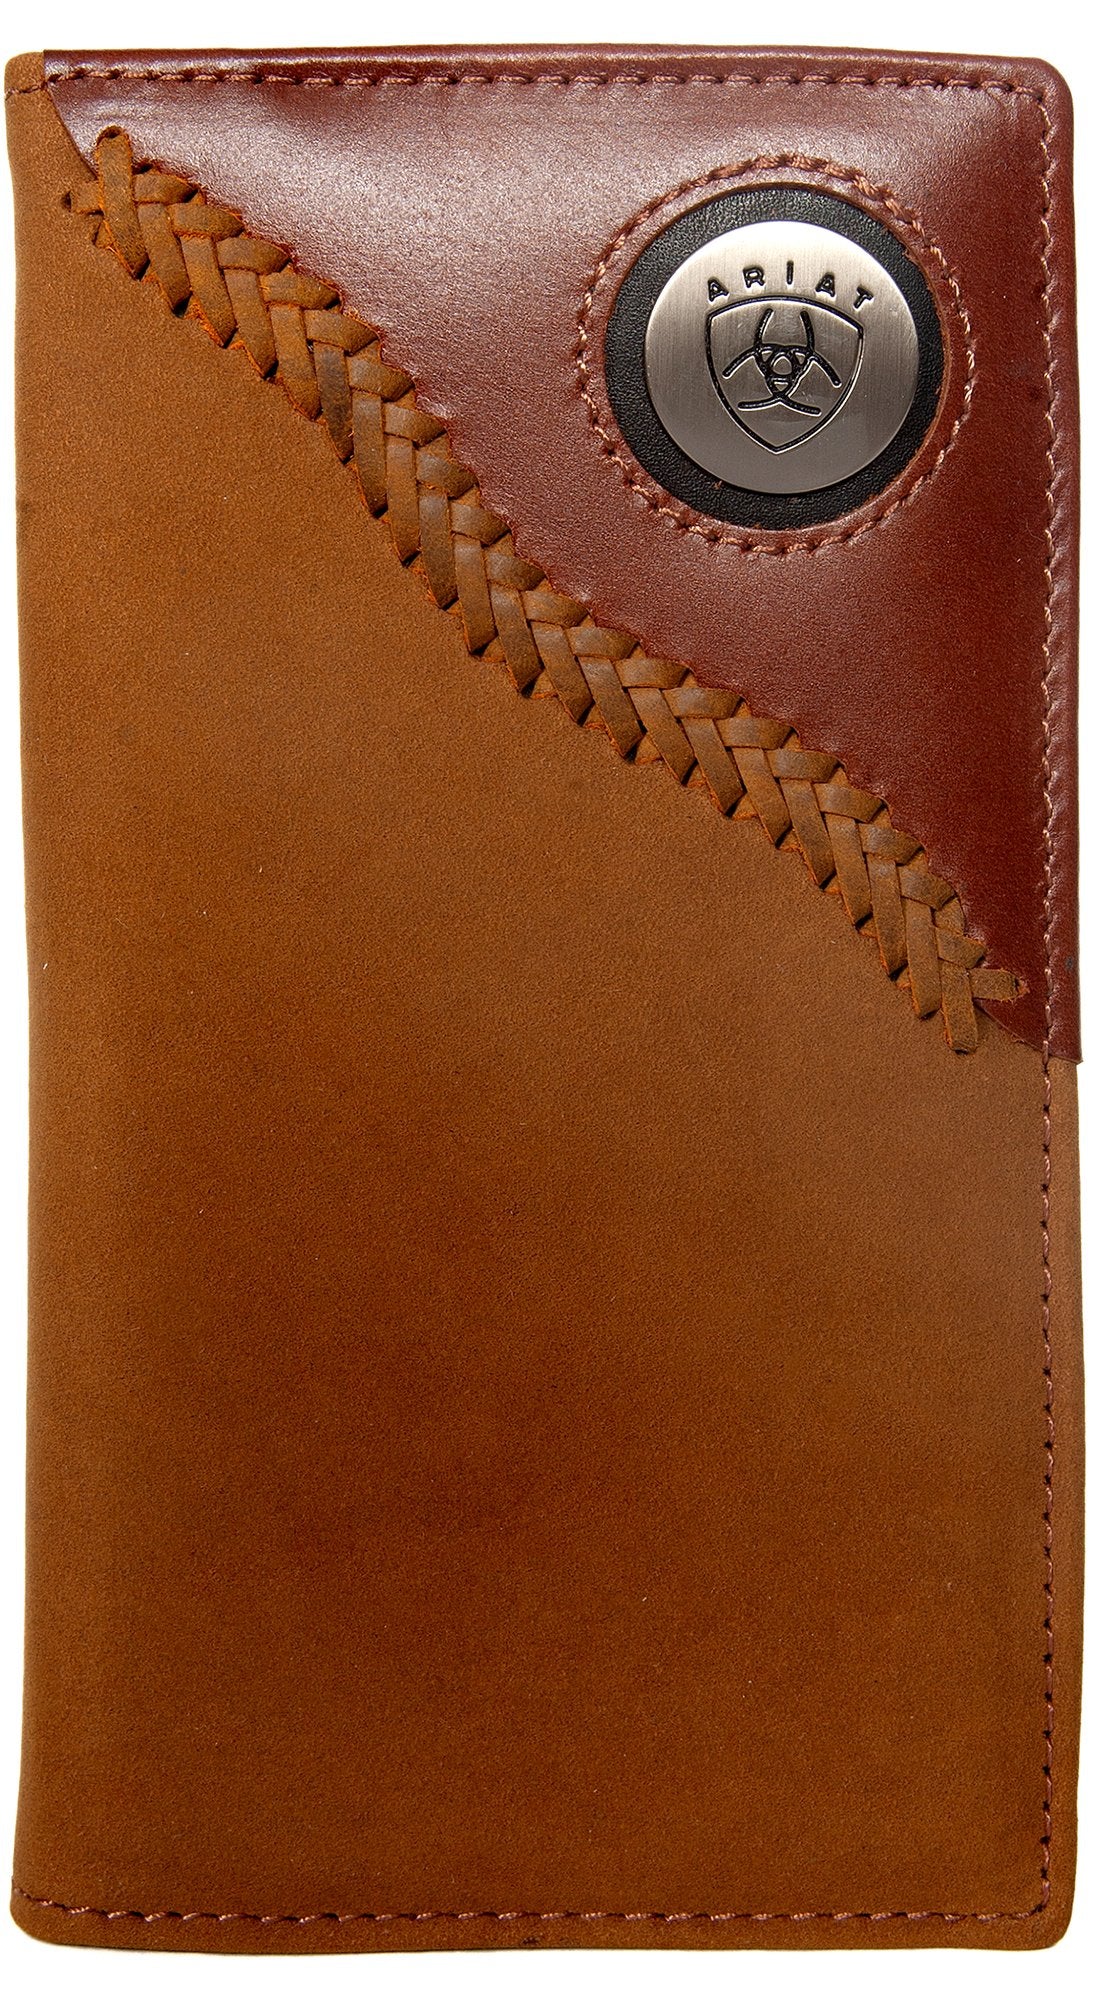 Ariat Rodeo Wallet WLT1113A